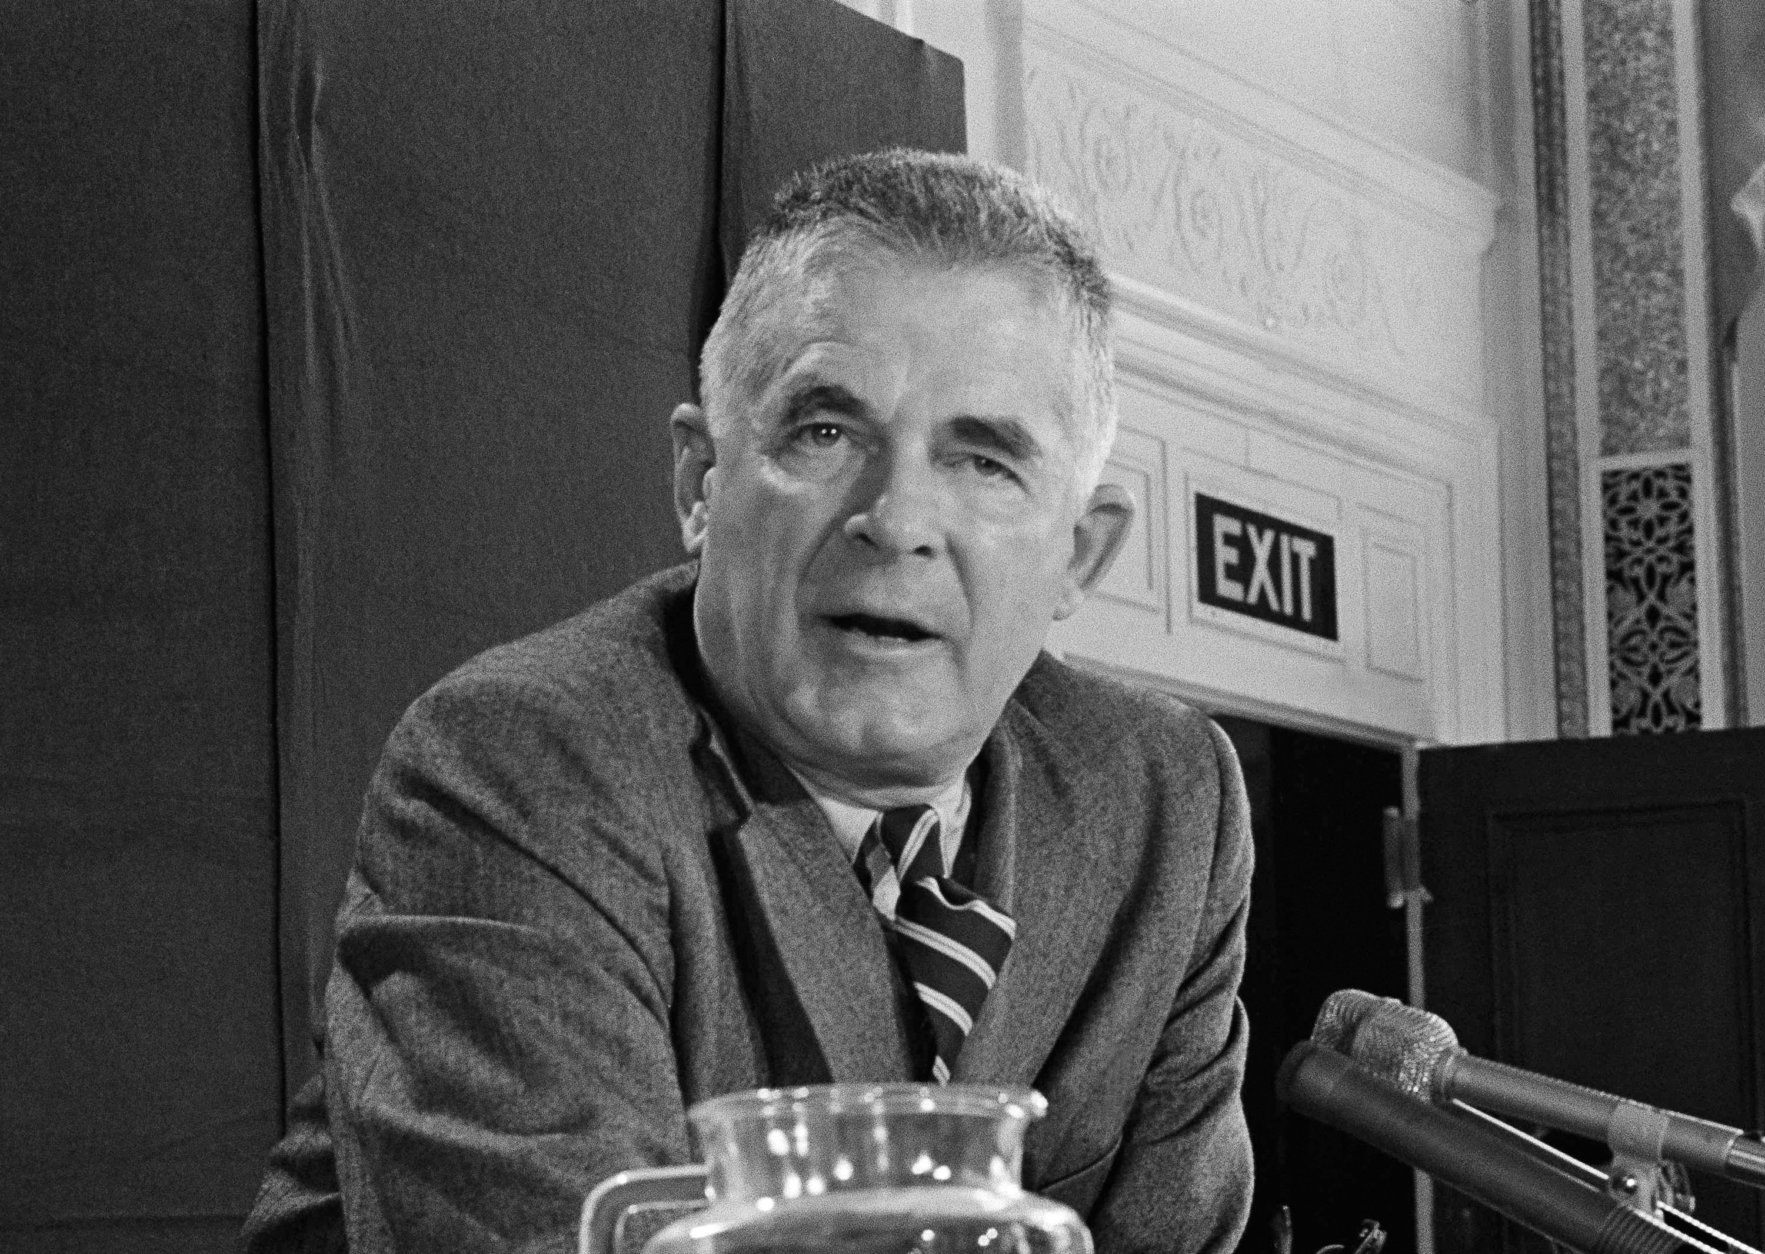 FILE - In this Oct. 20, 1973 file photo, Archibald Cox speaks at a news conference in Washington. Comparisons to the Nixon-era "Saturday night massacre" were swift after President Donald Trump fired the acting attorney general for refusing to enforce his executive order on immigrants and refugees. In both cases, a dispute between a president and his Justice Department led to an evening maneuver by the president to install an acting attorney general more to his liking. (AP Photo/John Duricka, File)